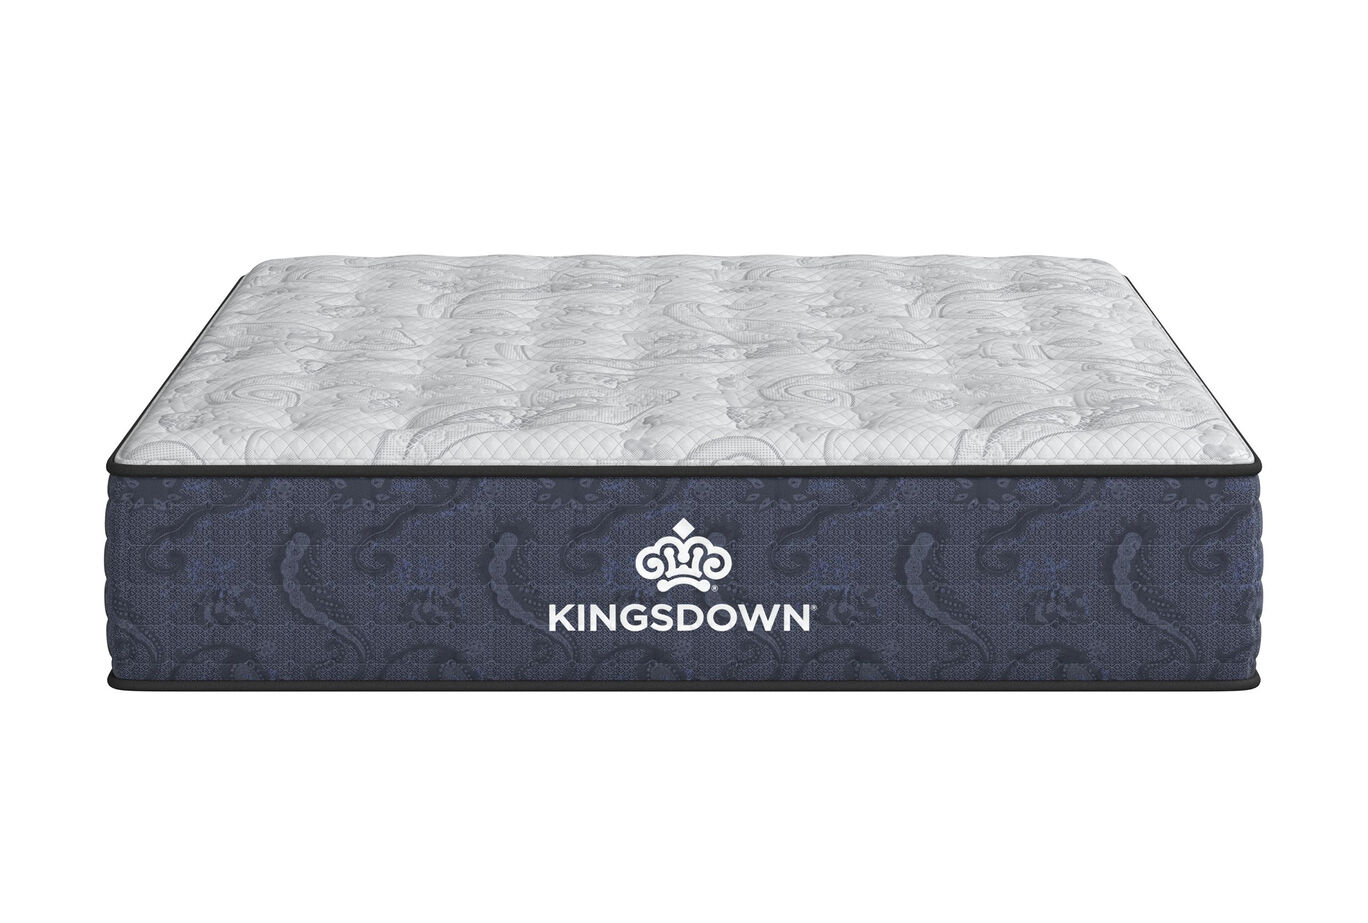 Kingsdown Vintage Sycamore Grove Plush Tight Top Mattress 13.5" image number 5